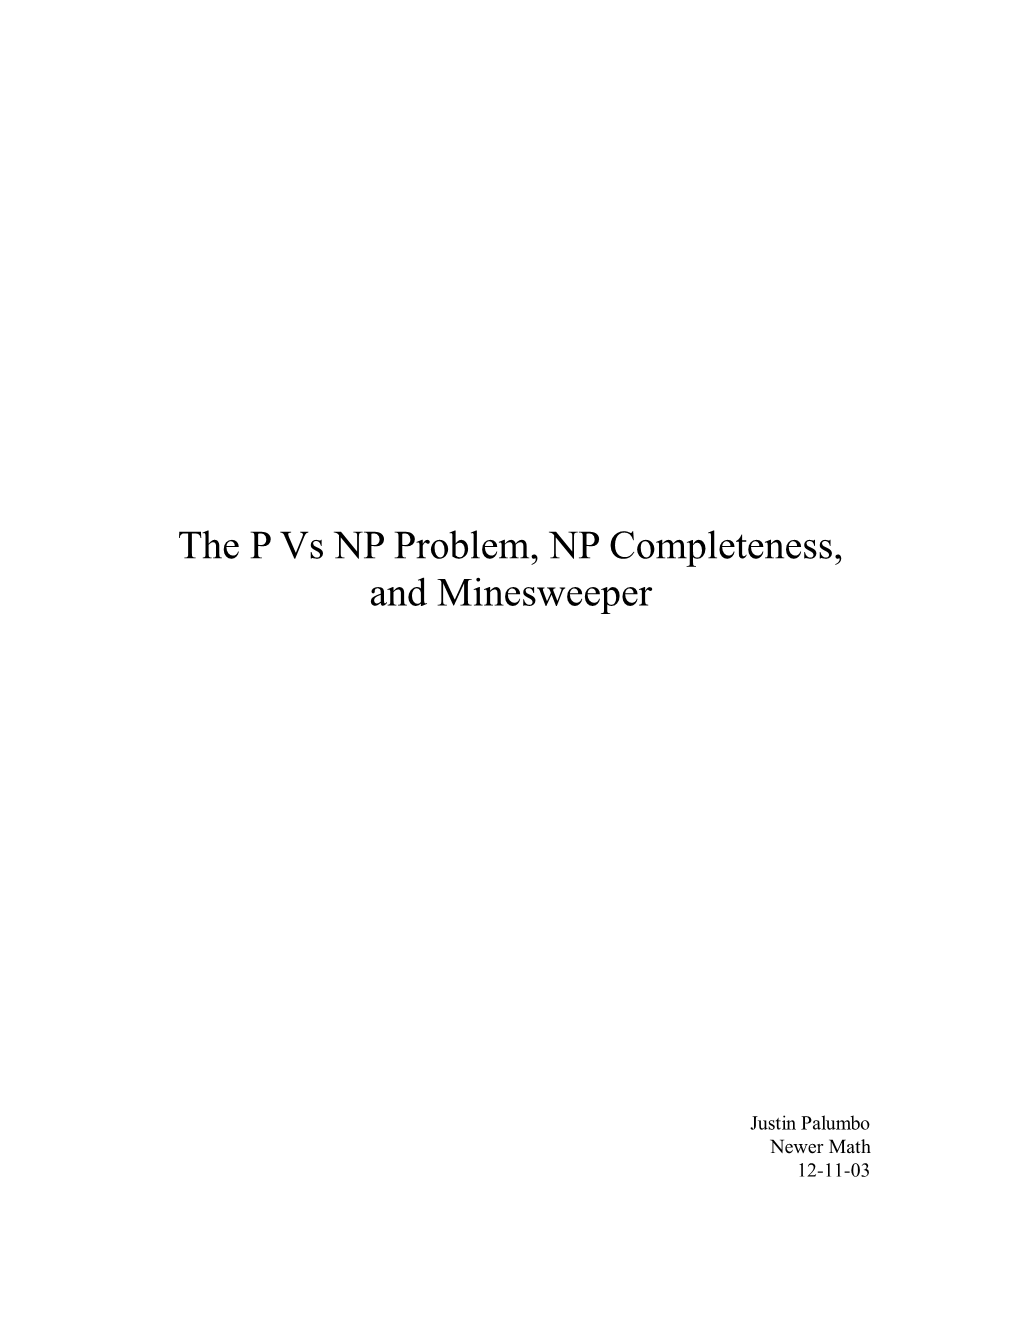 The P Vs NP Problem, NP Completeness, and Minesweeper